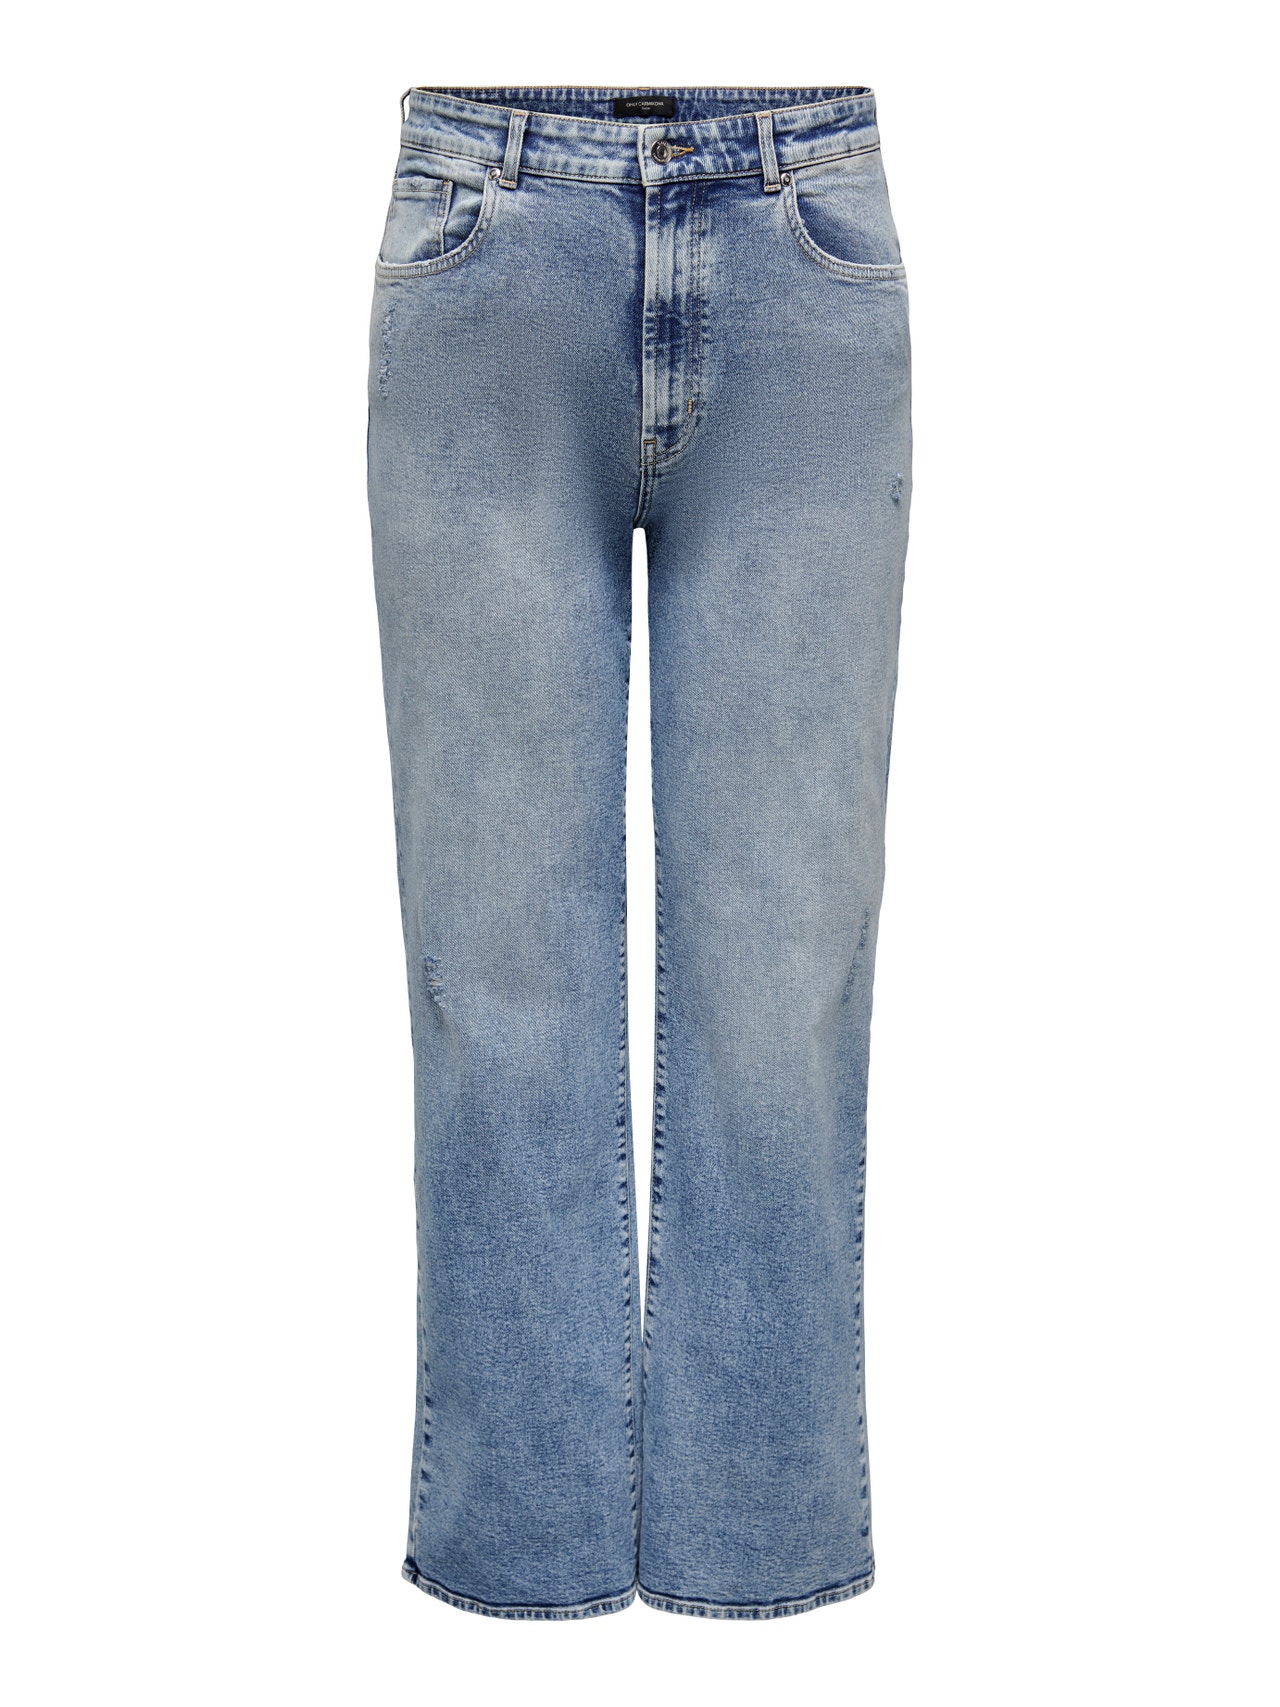 ONLY Skinny Fit Hohe Taille Jeans -Light Blue Denim - 15287280